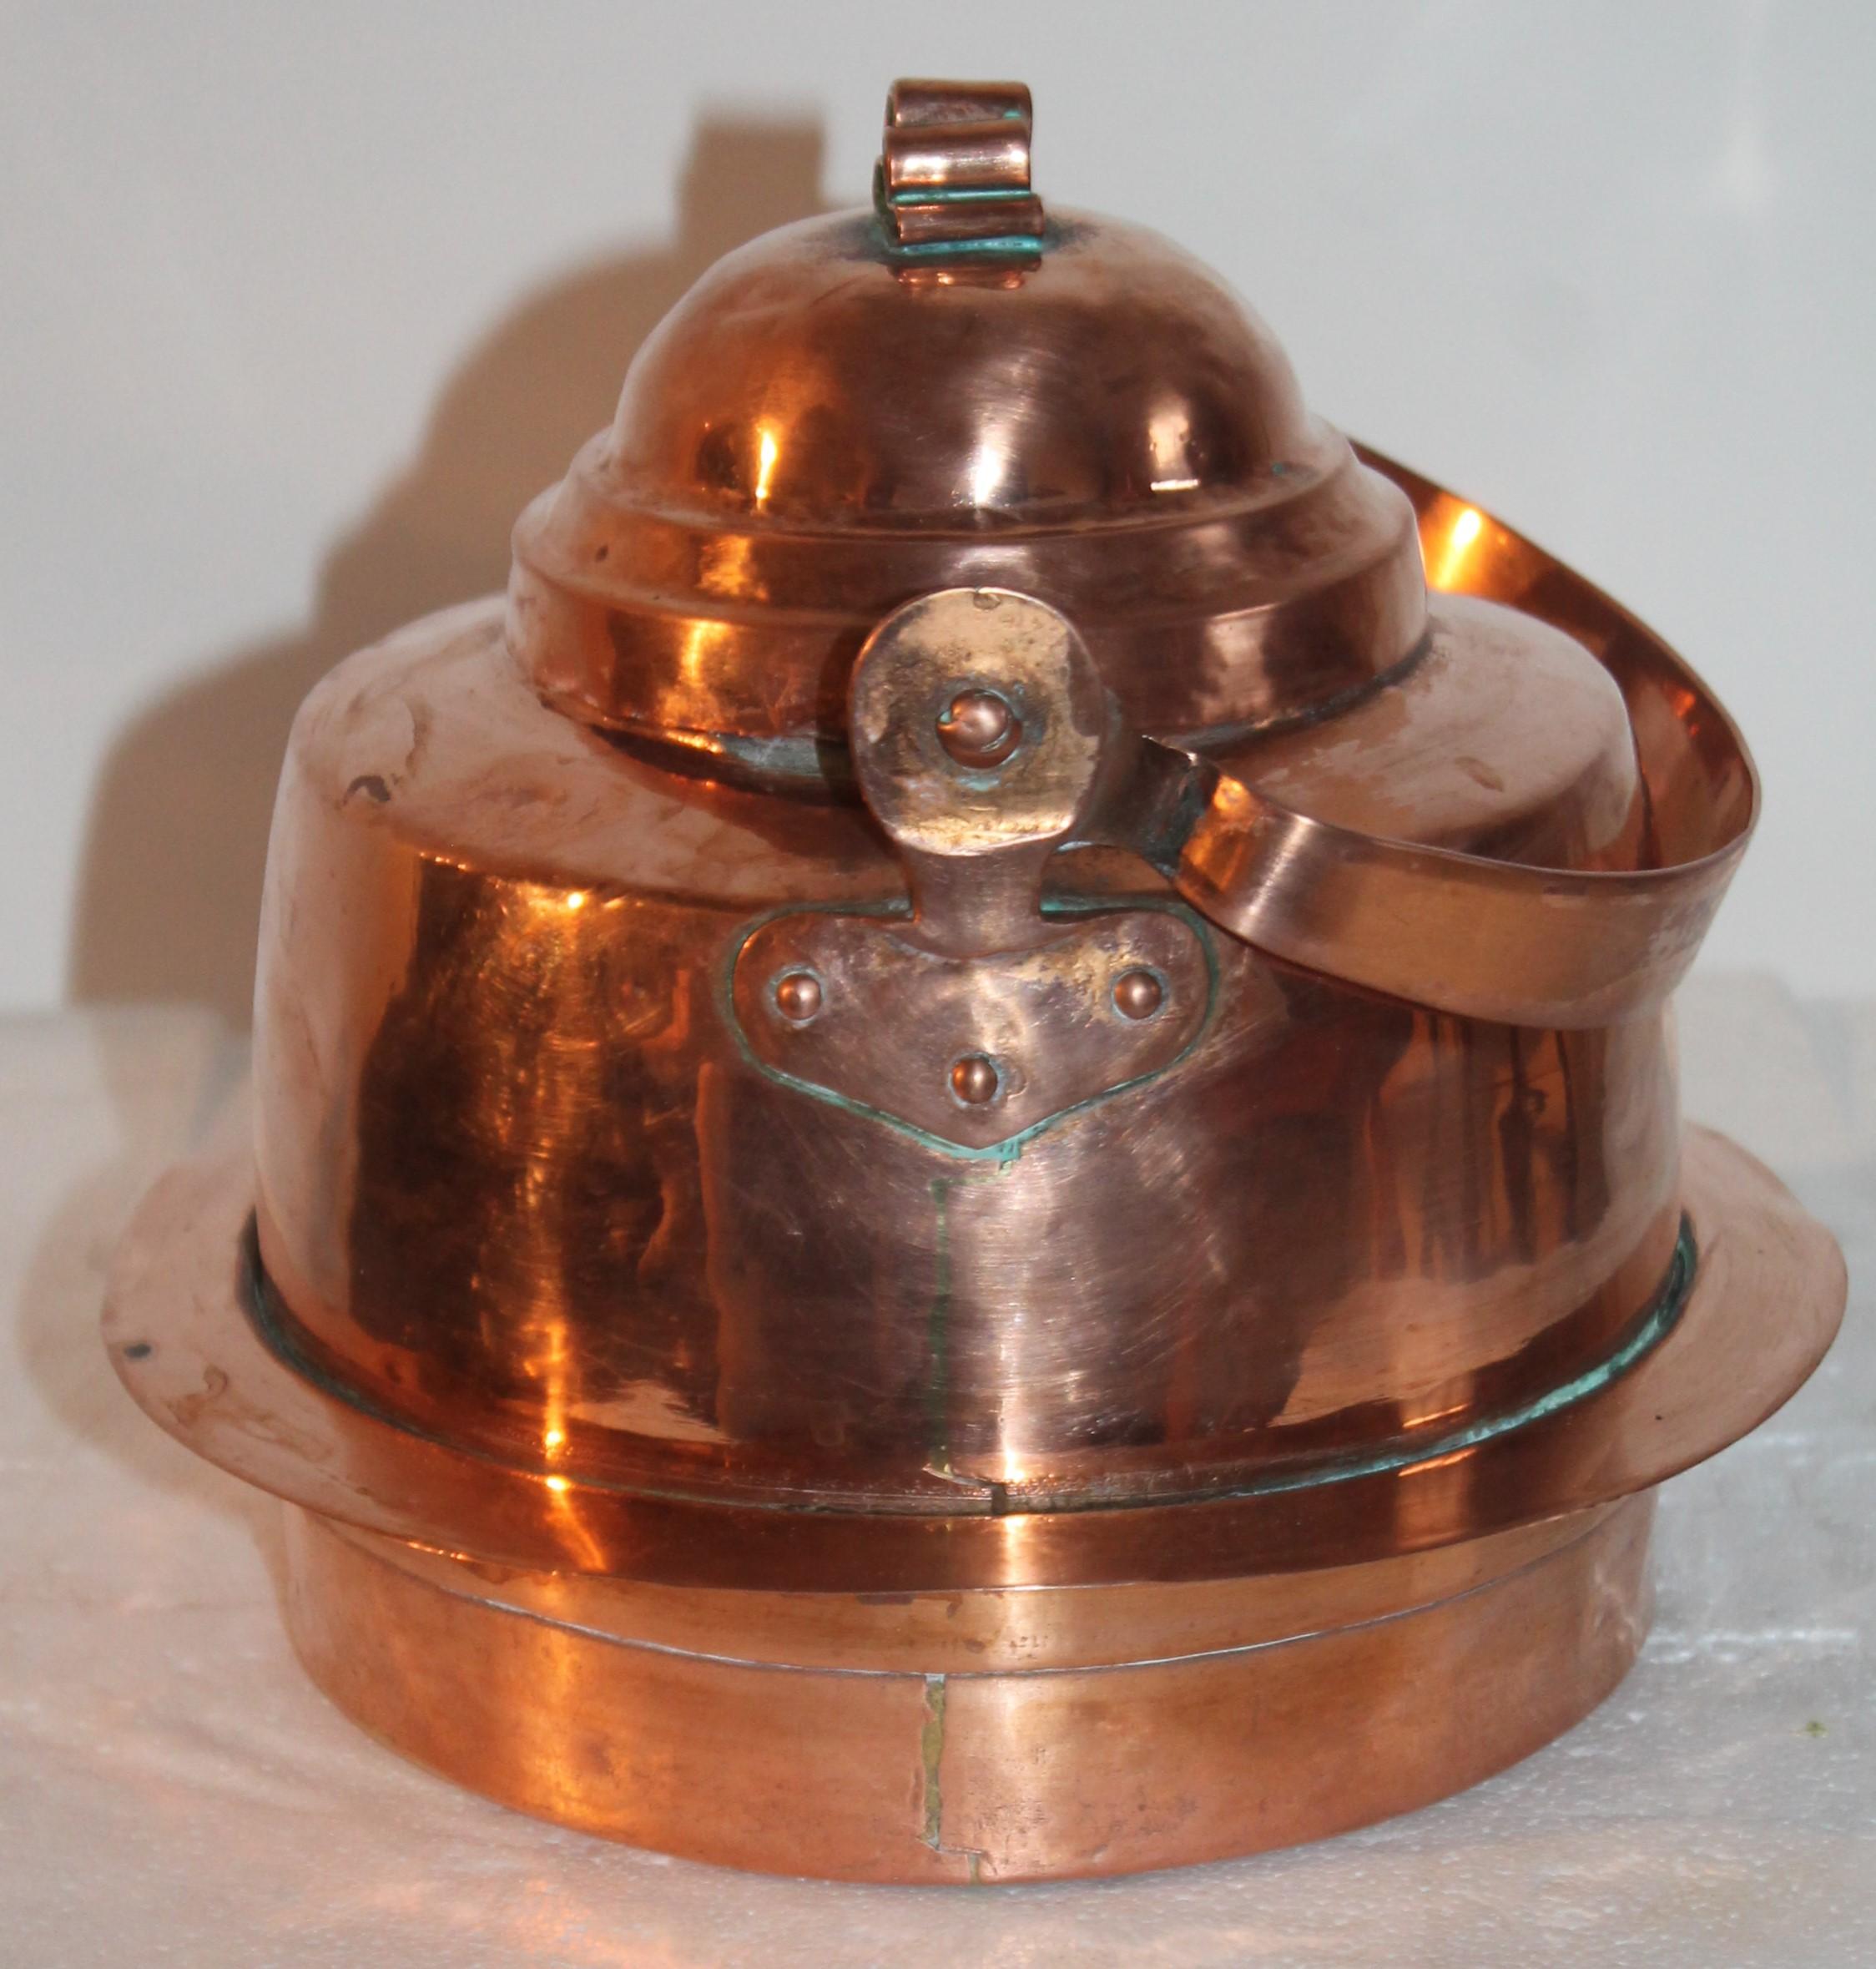 This fine European copper tea kettle is in fine polished condition. It could be used on your stove as well as decorative on a shelf. Signed on handle O.S.THORIN -MARSTRAND -2.